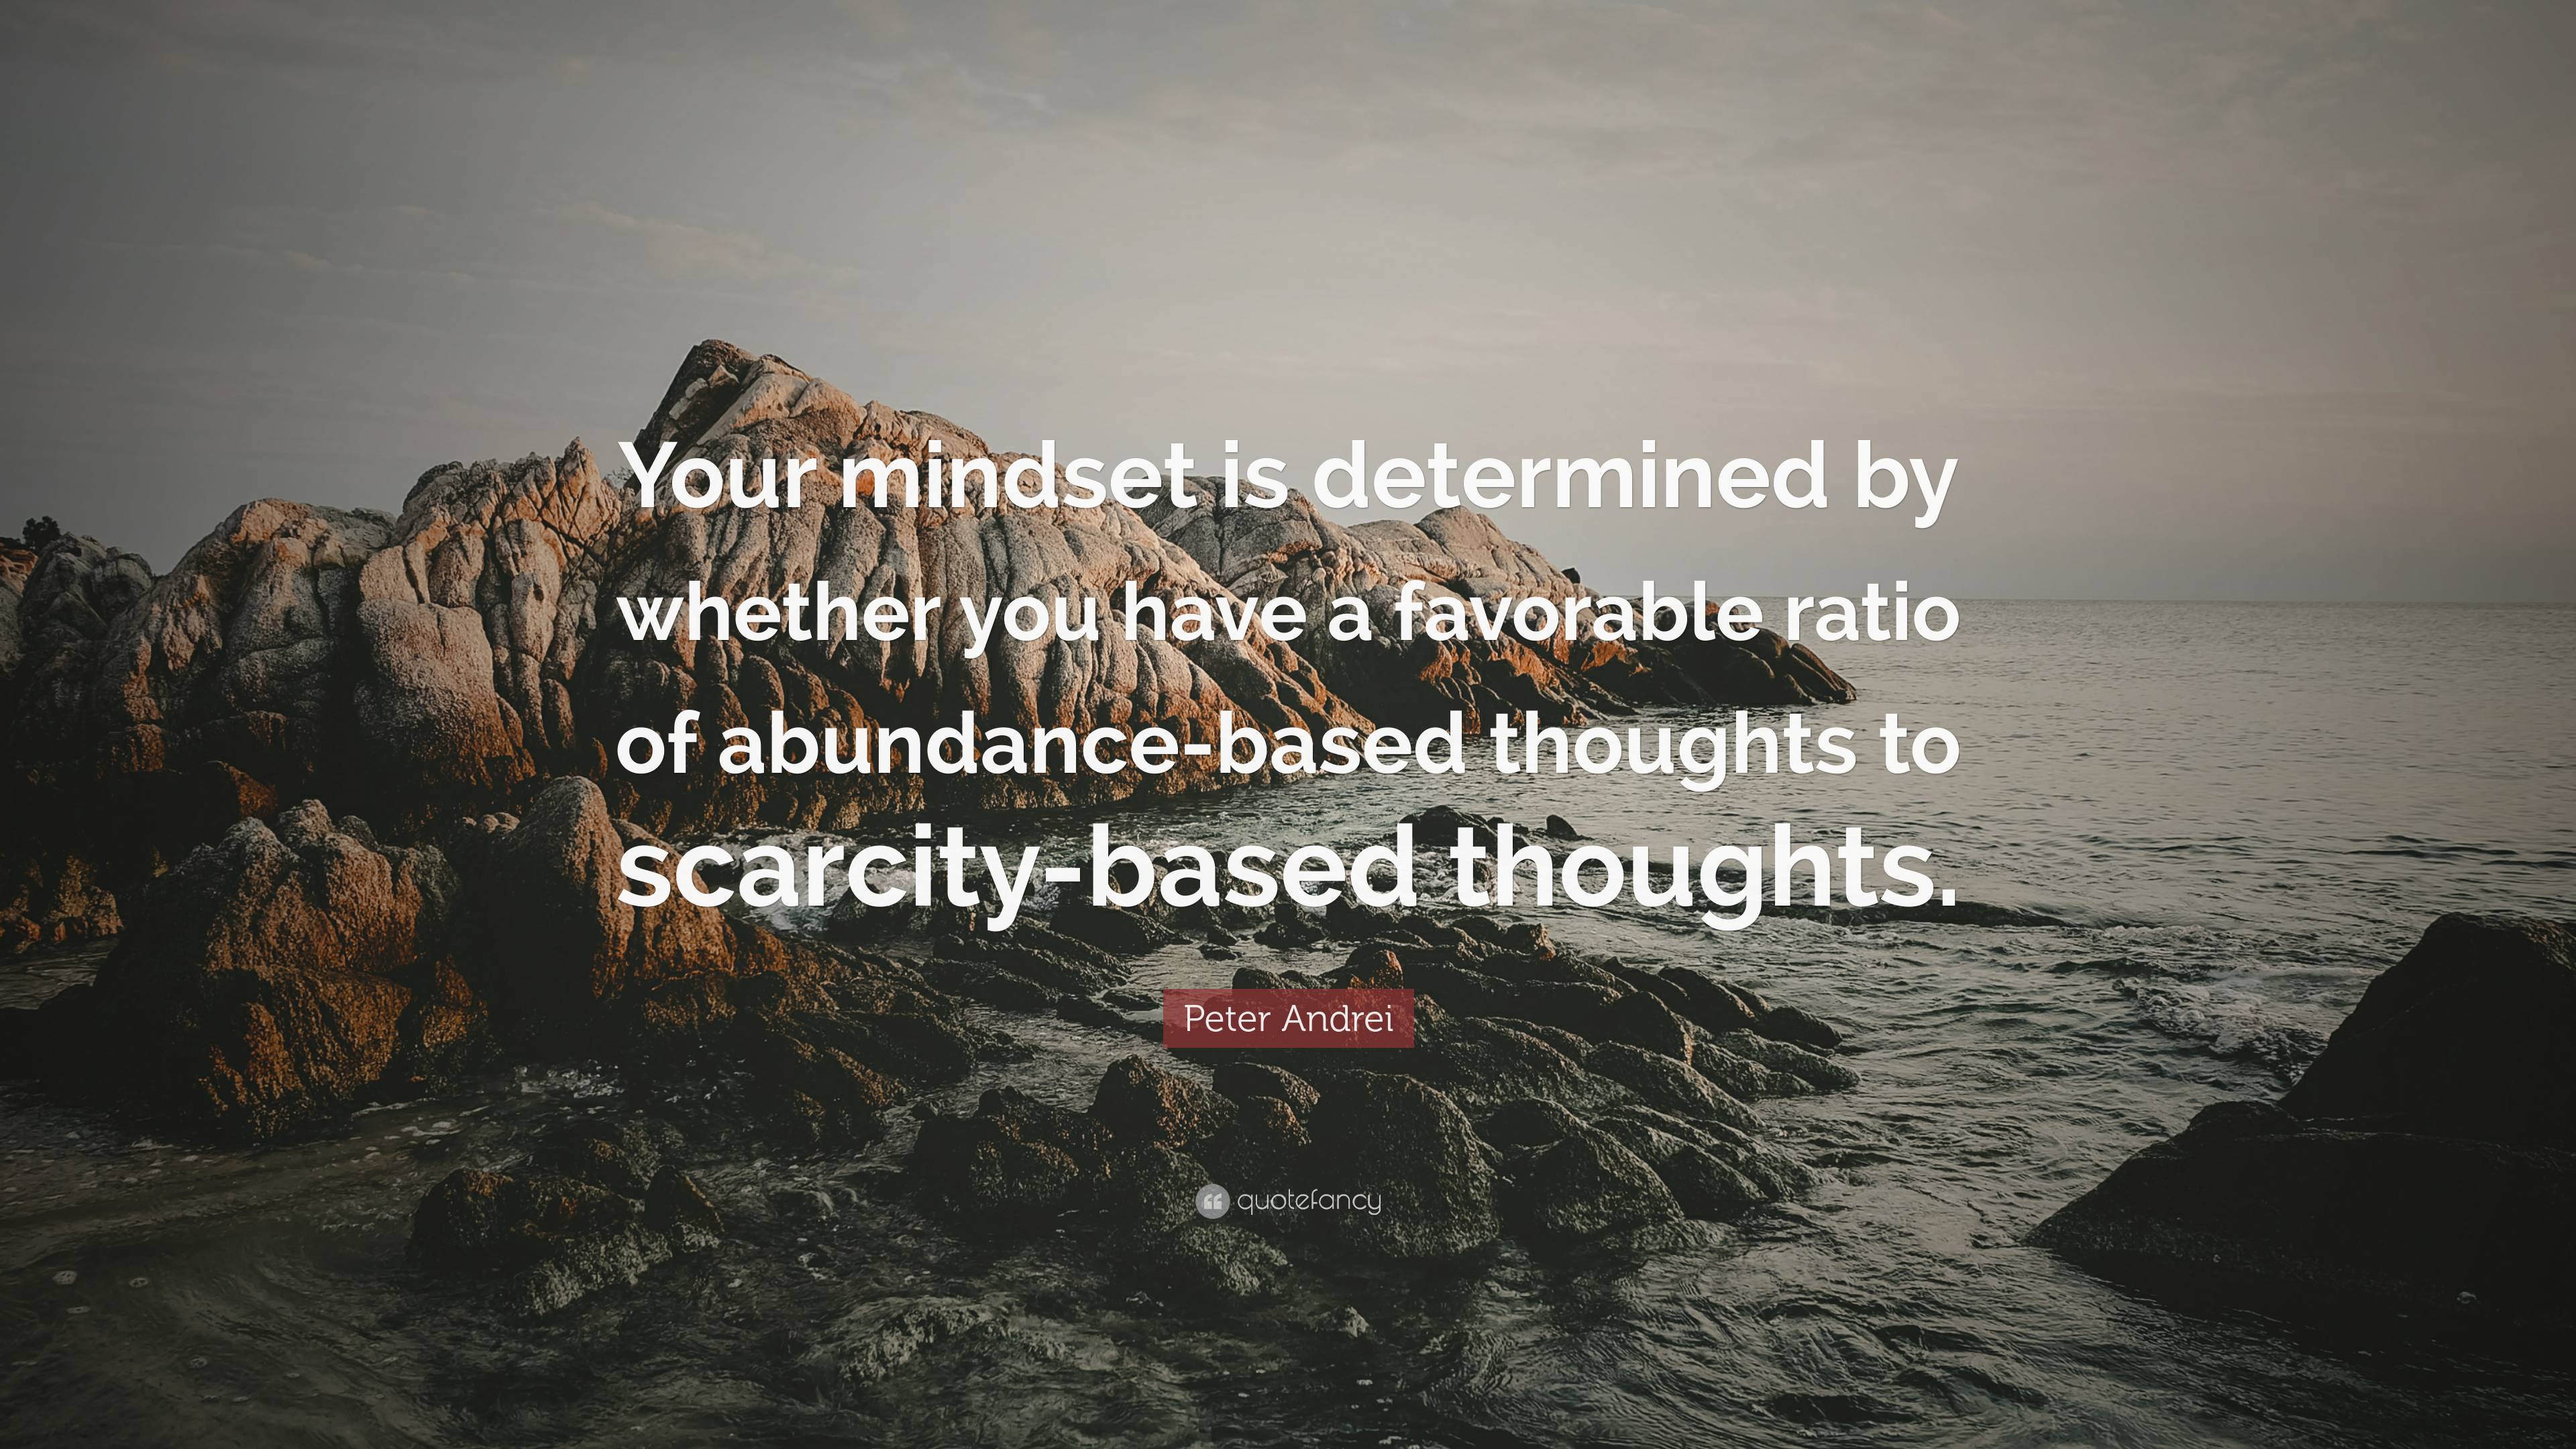 Peter Andrei Quote: “Your mindset is determined by whether you have a ...